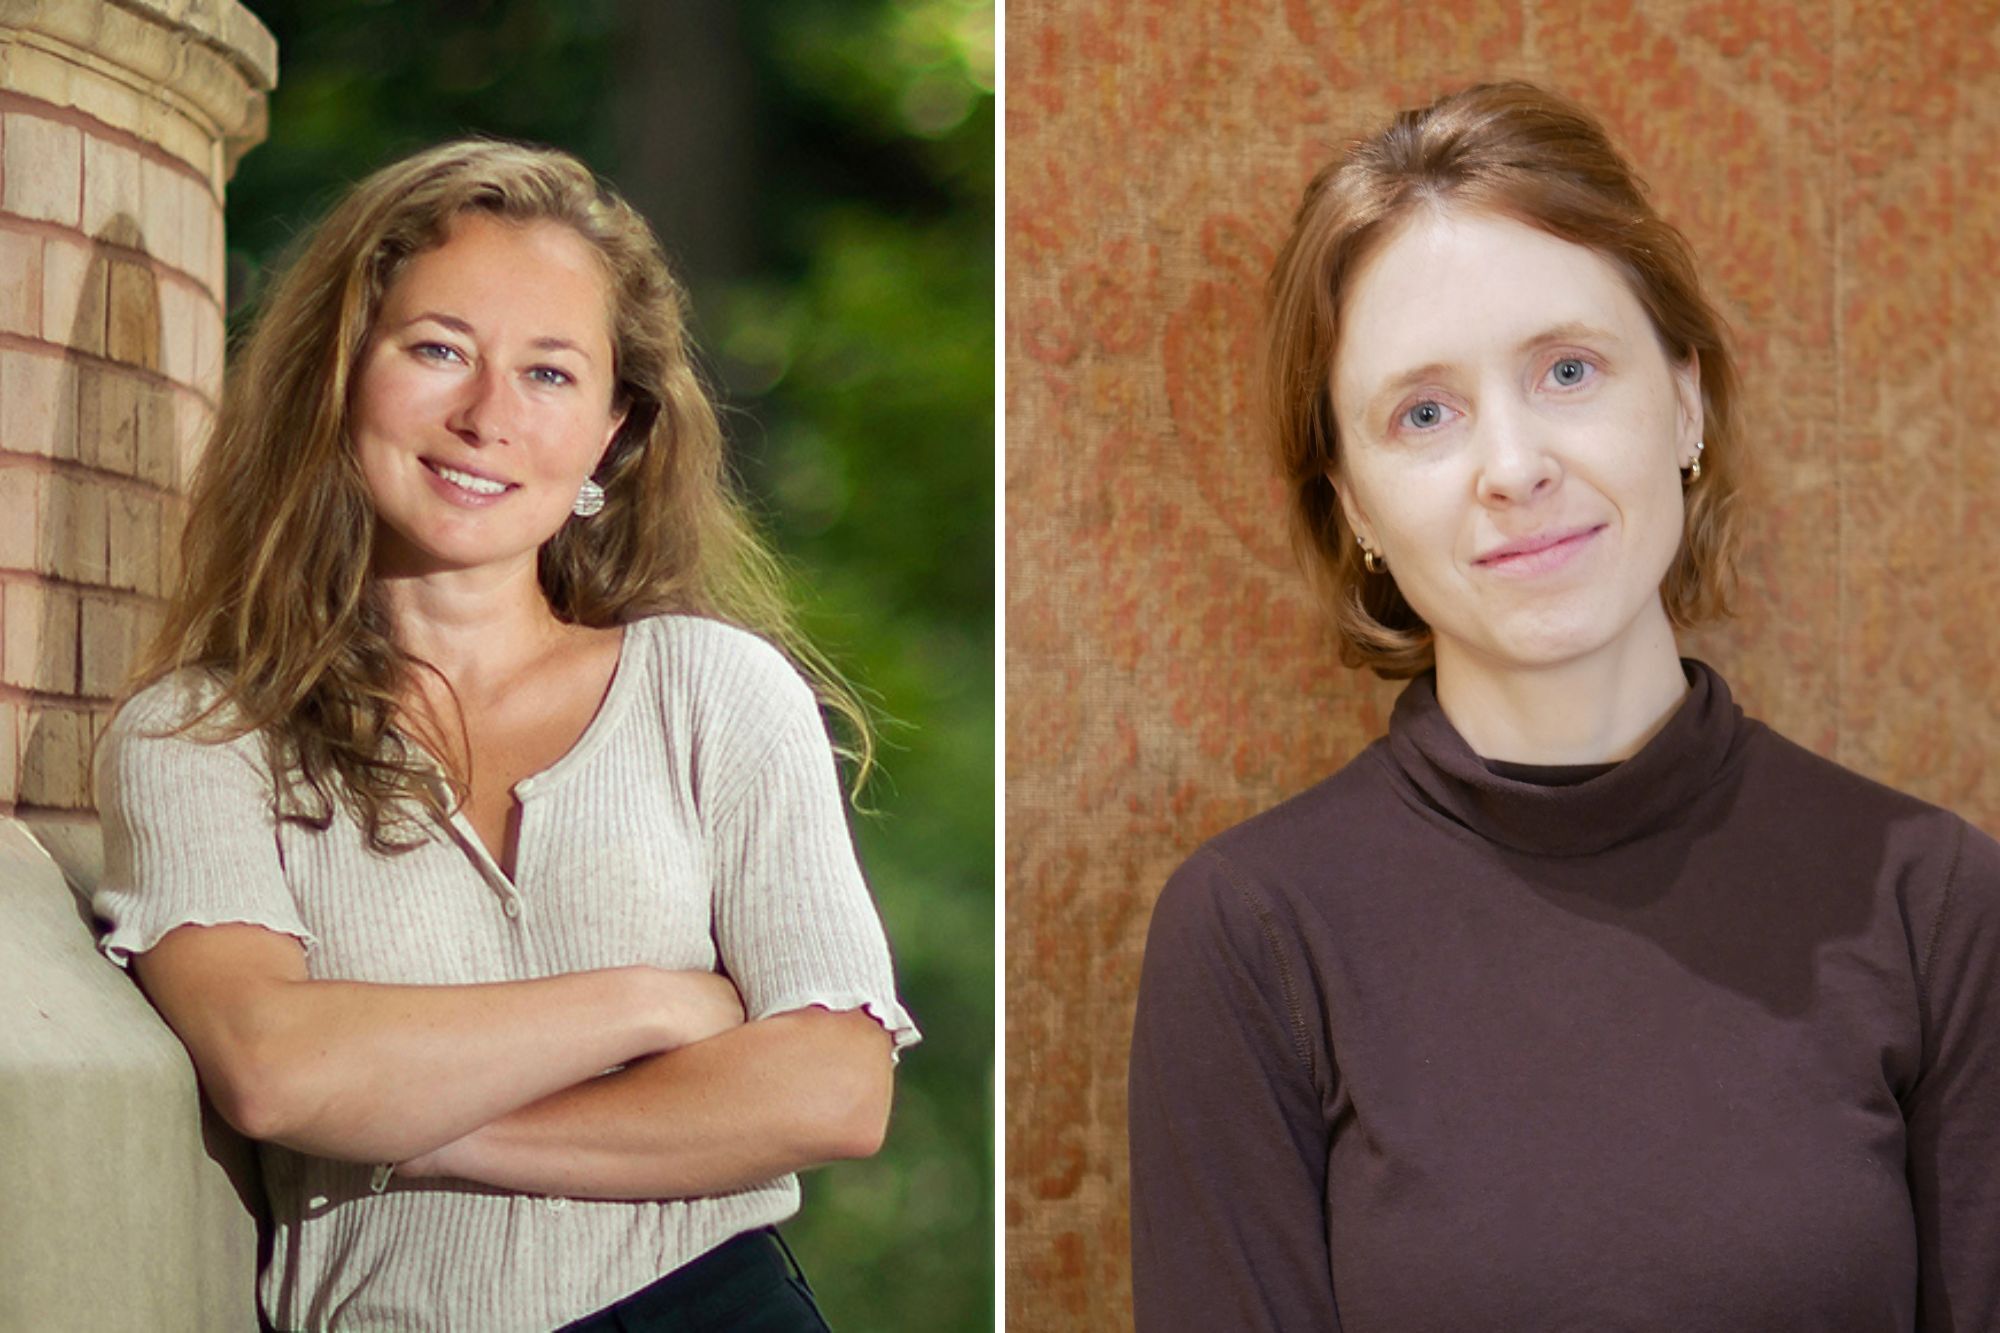 Arielle Xena Alterwaite and Katherine Scahill awarded Newcombe Doctoral Dissertation Fellowship